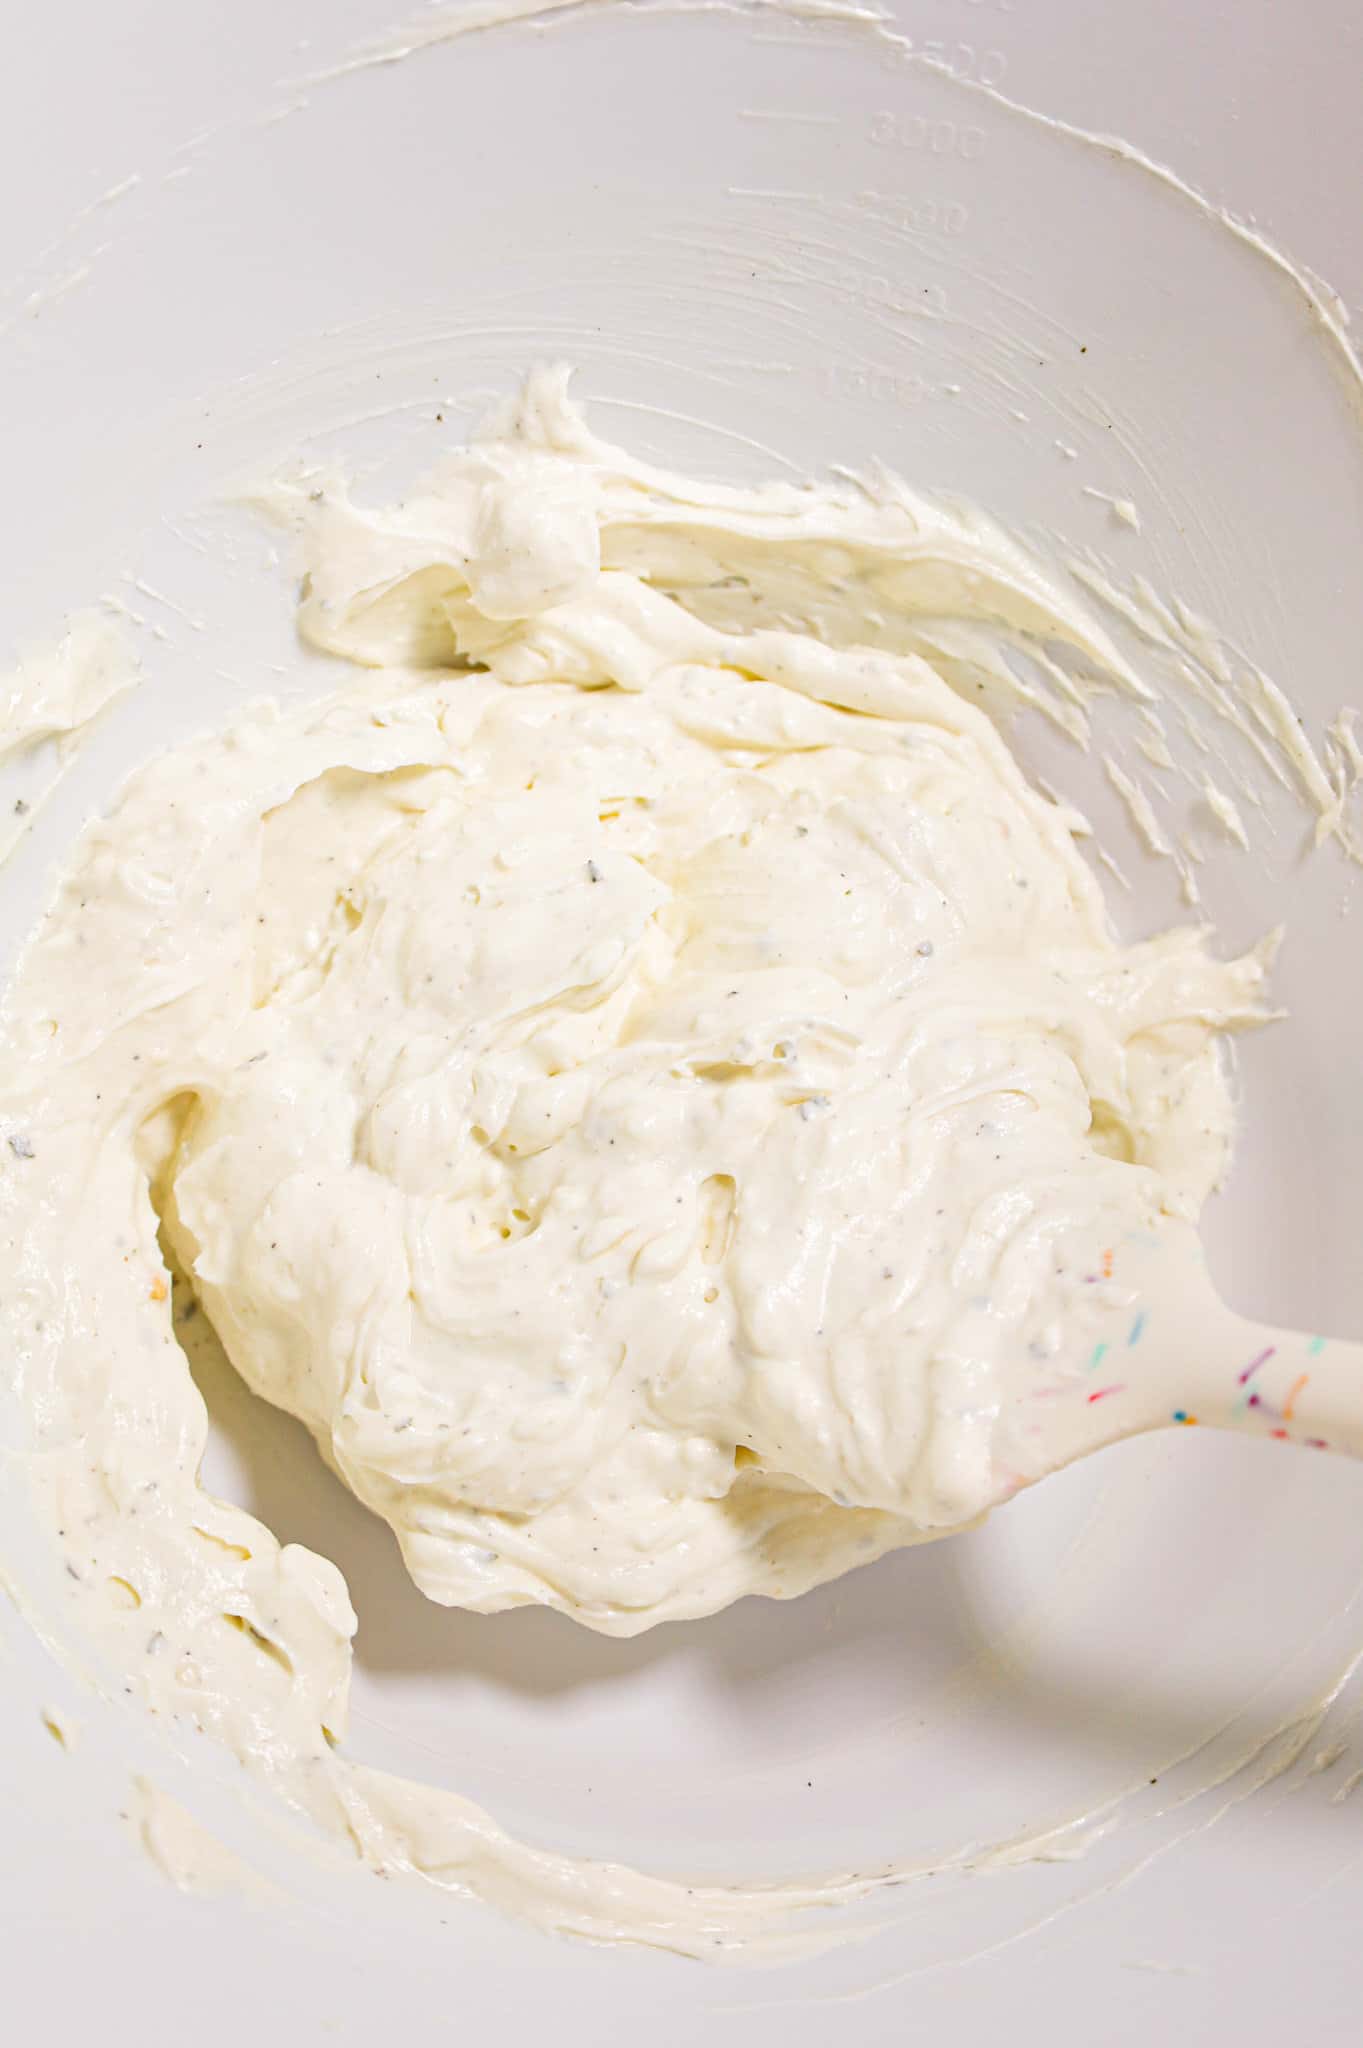 cream cheese and sour cream being stirred together in a mixing bowl